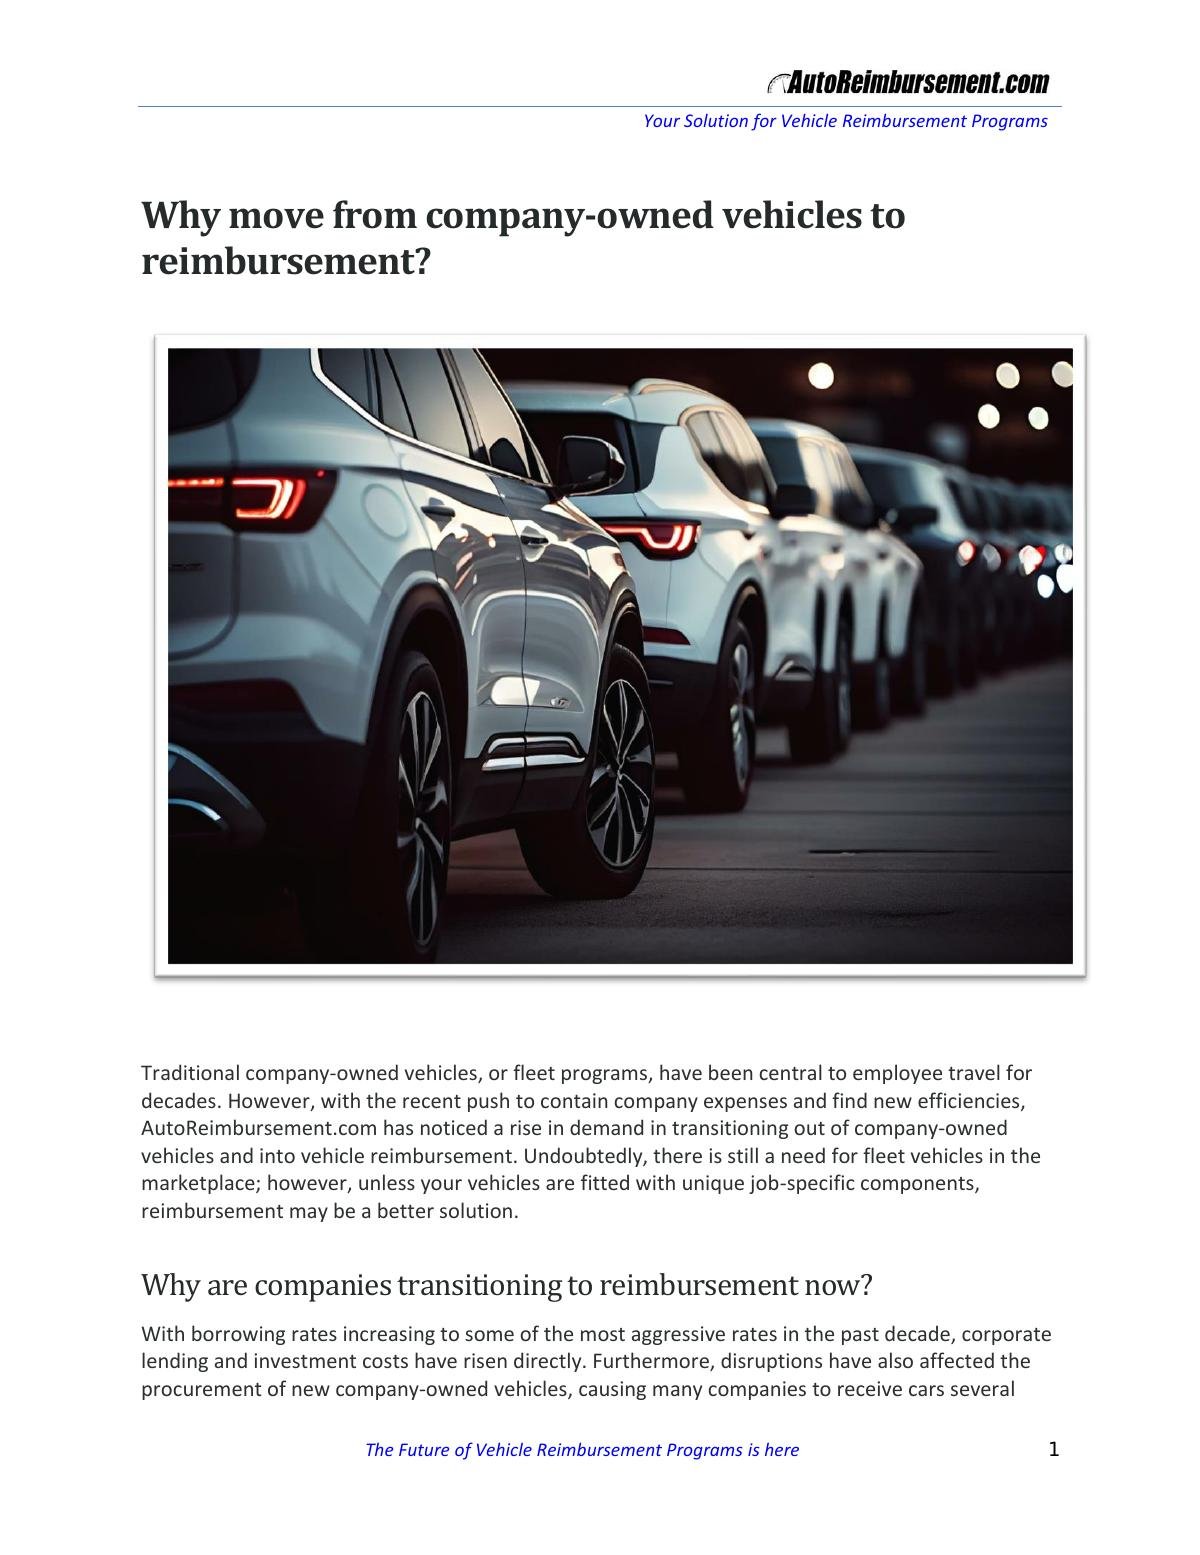 Why move from company-owned vehicles to reimbursement?